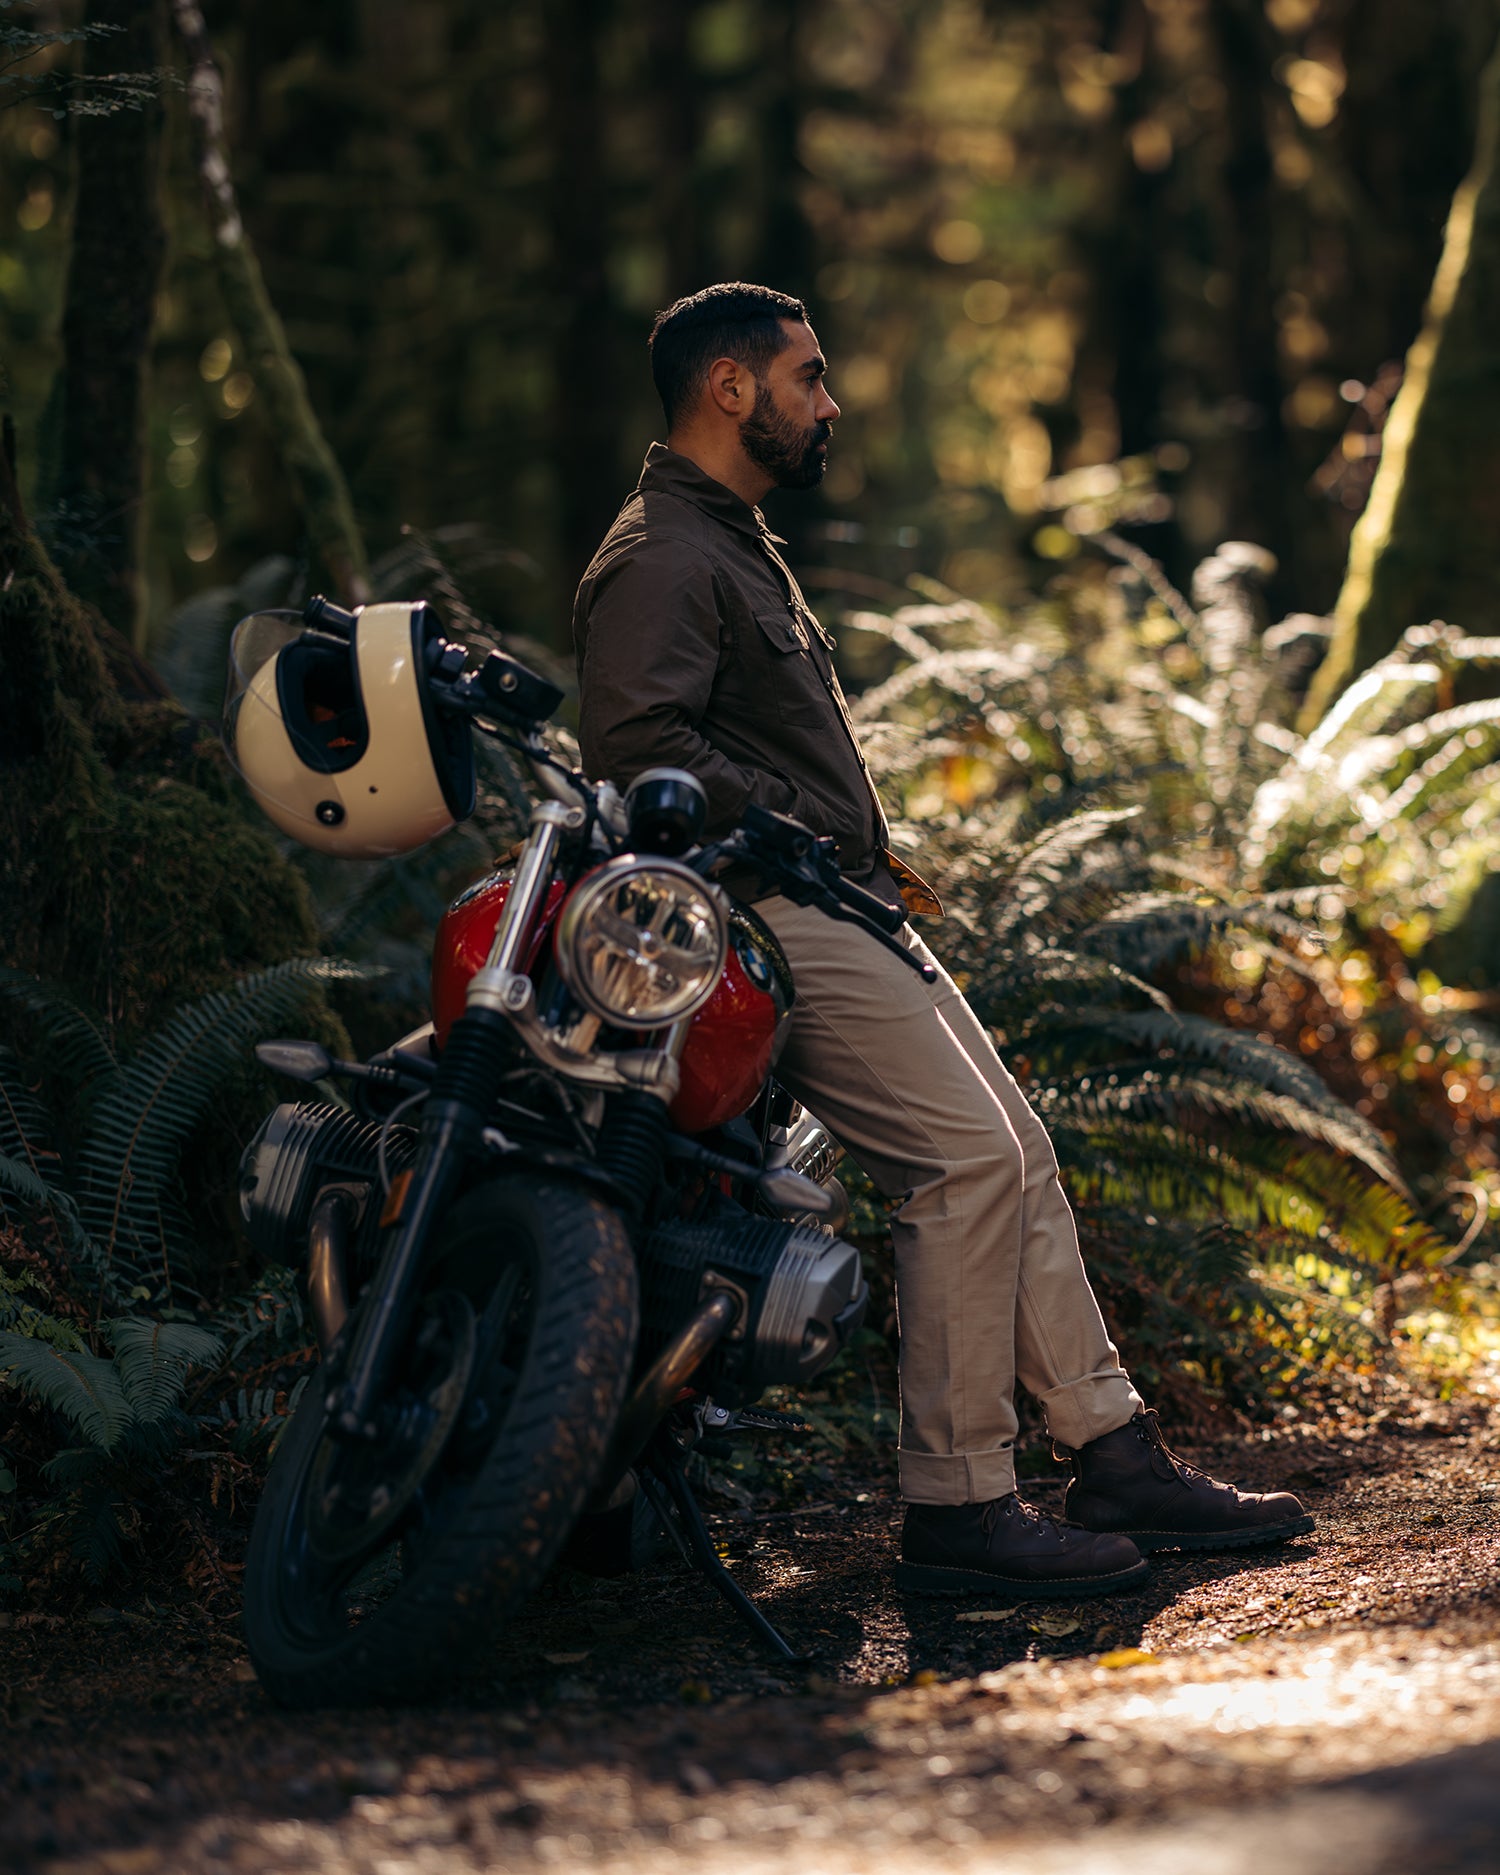 Man sitting on the side of parked motorbike alongside a forested road wearing Foreign Rider clothing